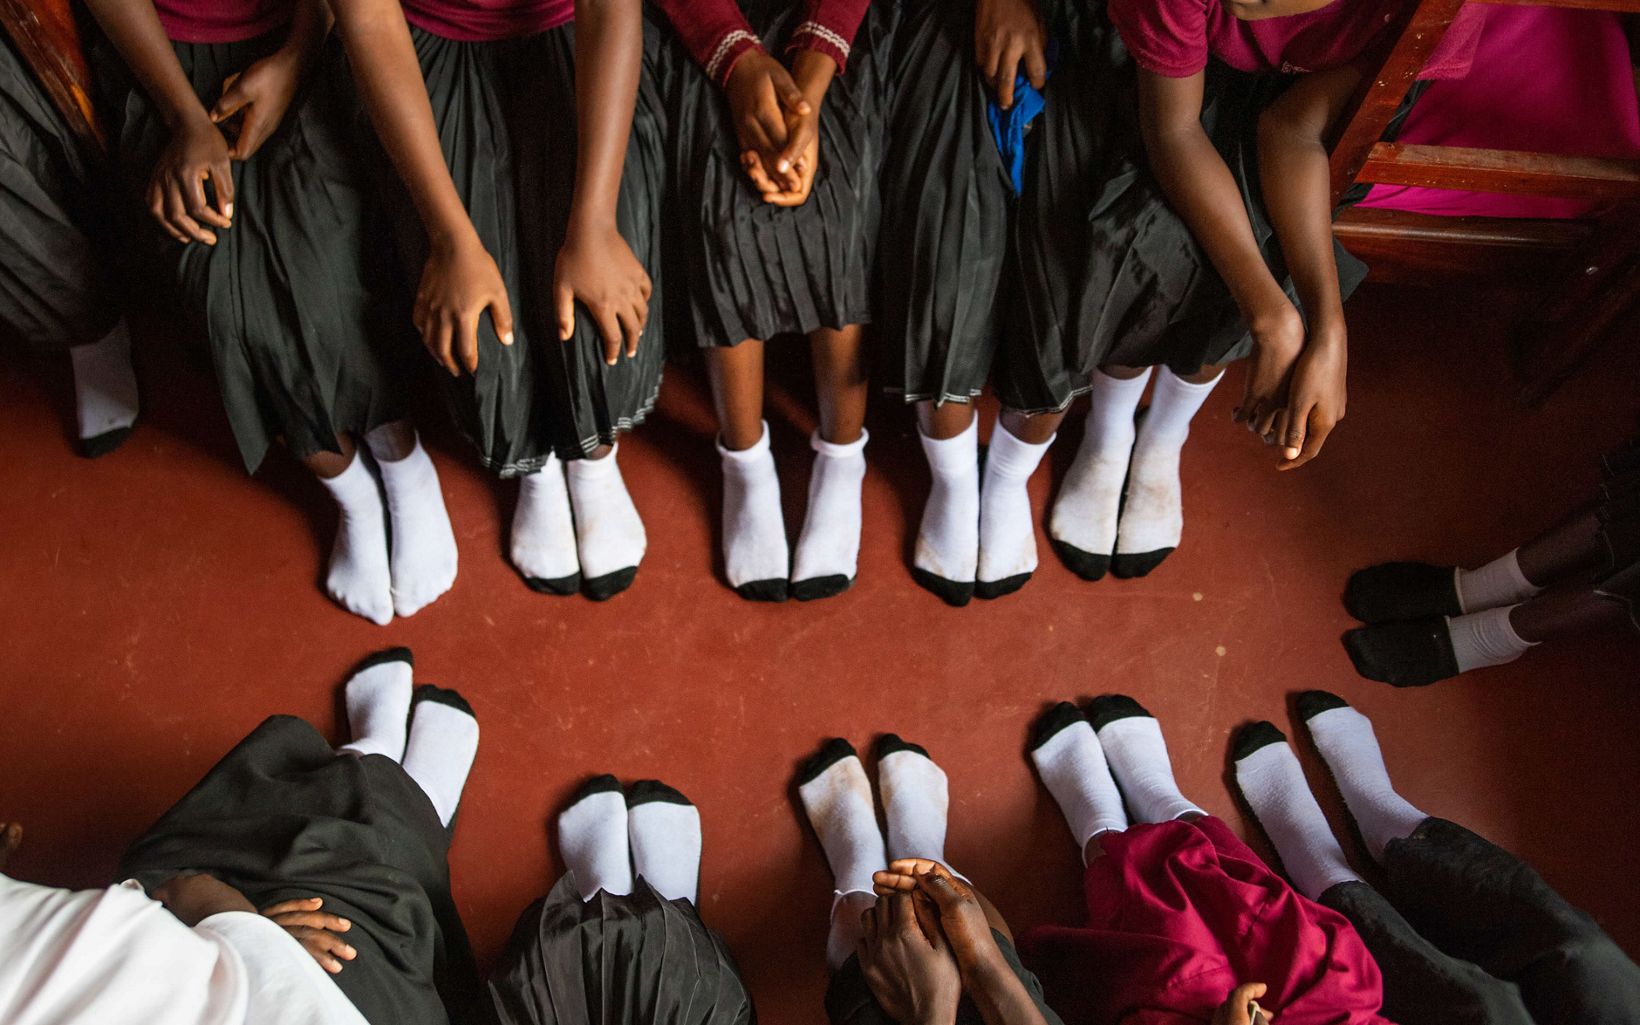 Happy Feet One of the benefits of the Lagosa Secondary School girls' dorm is the safety and friendship the girls have together.  © Roshni Lodhia